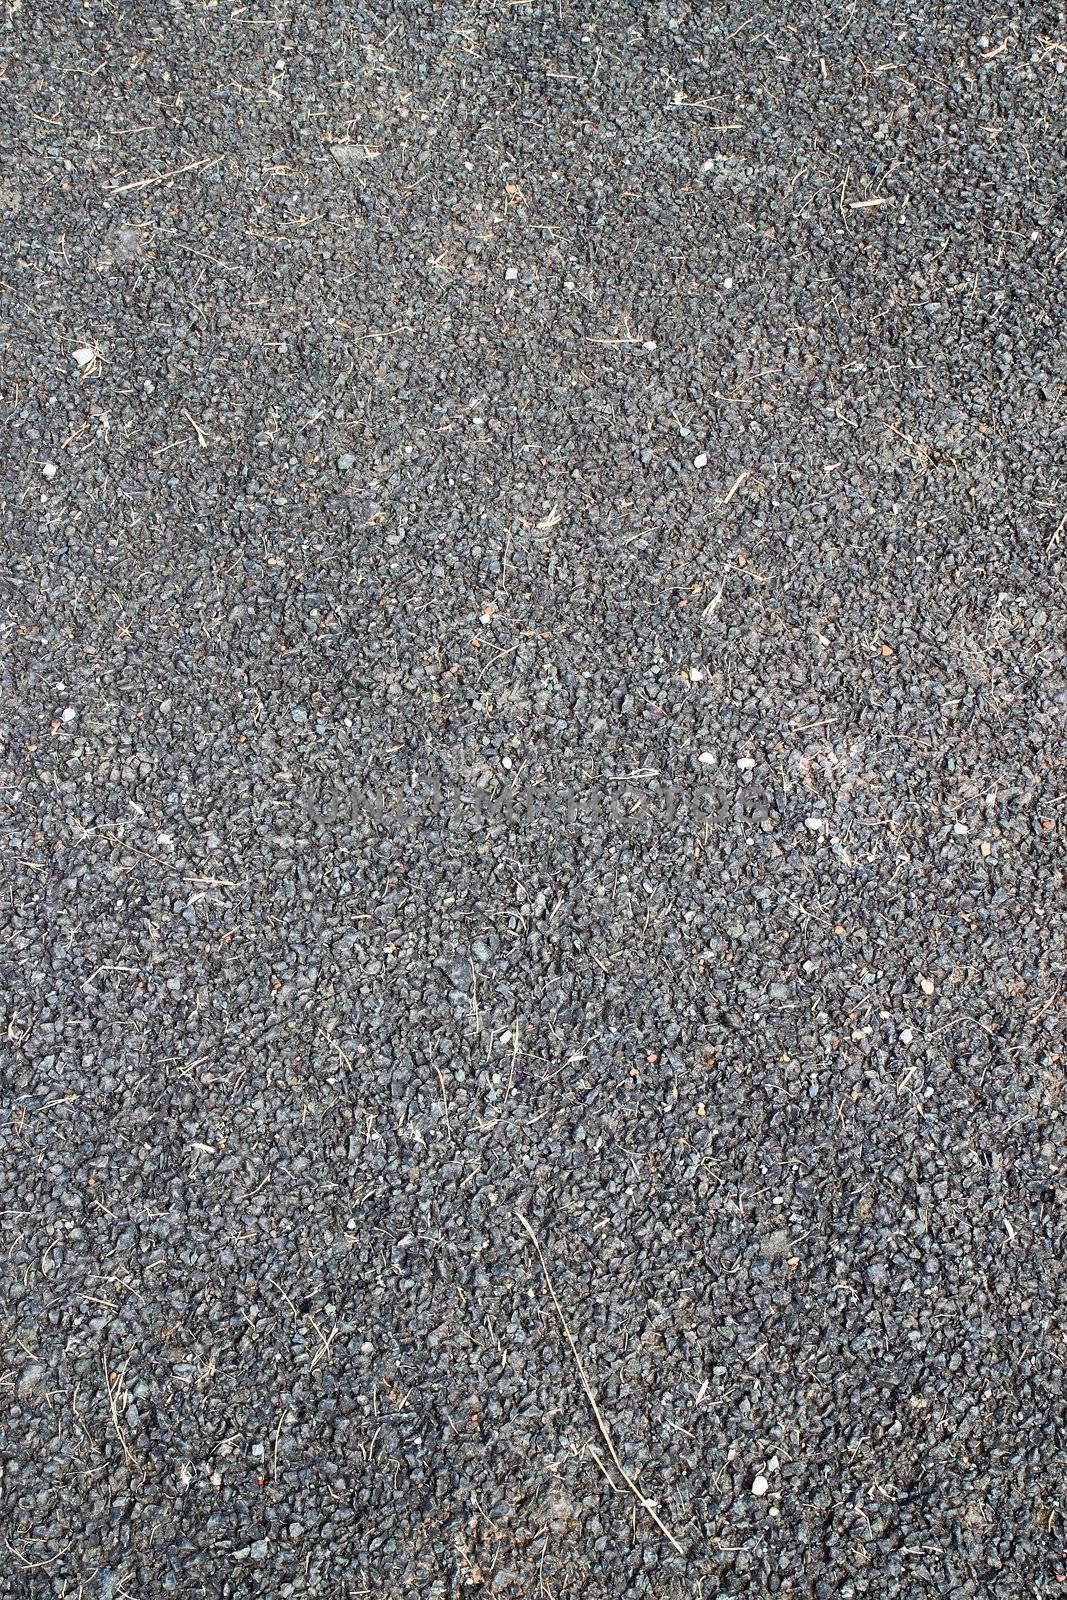 Texture closeup of road by geargodz